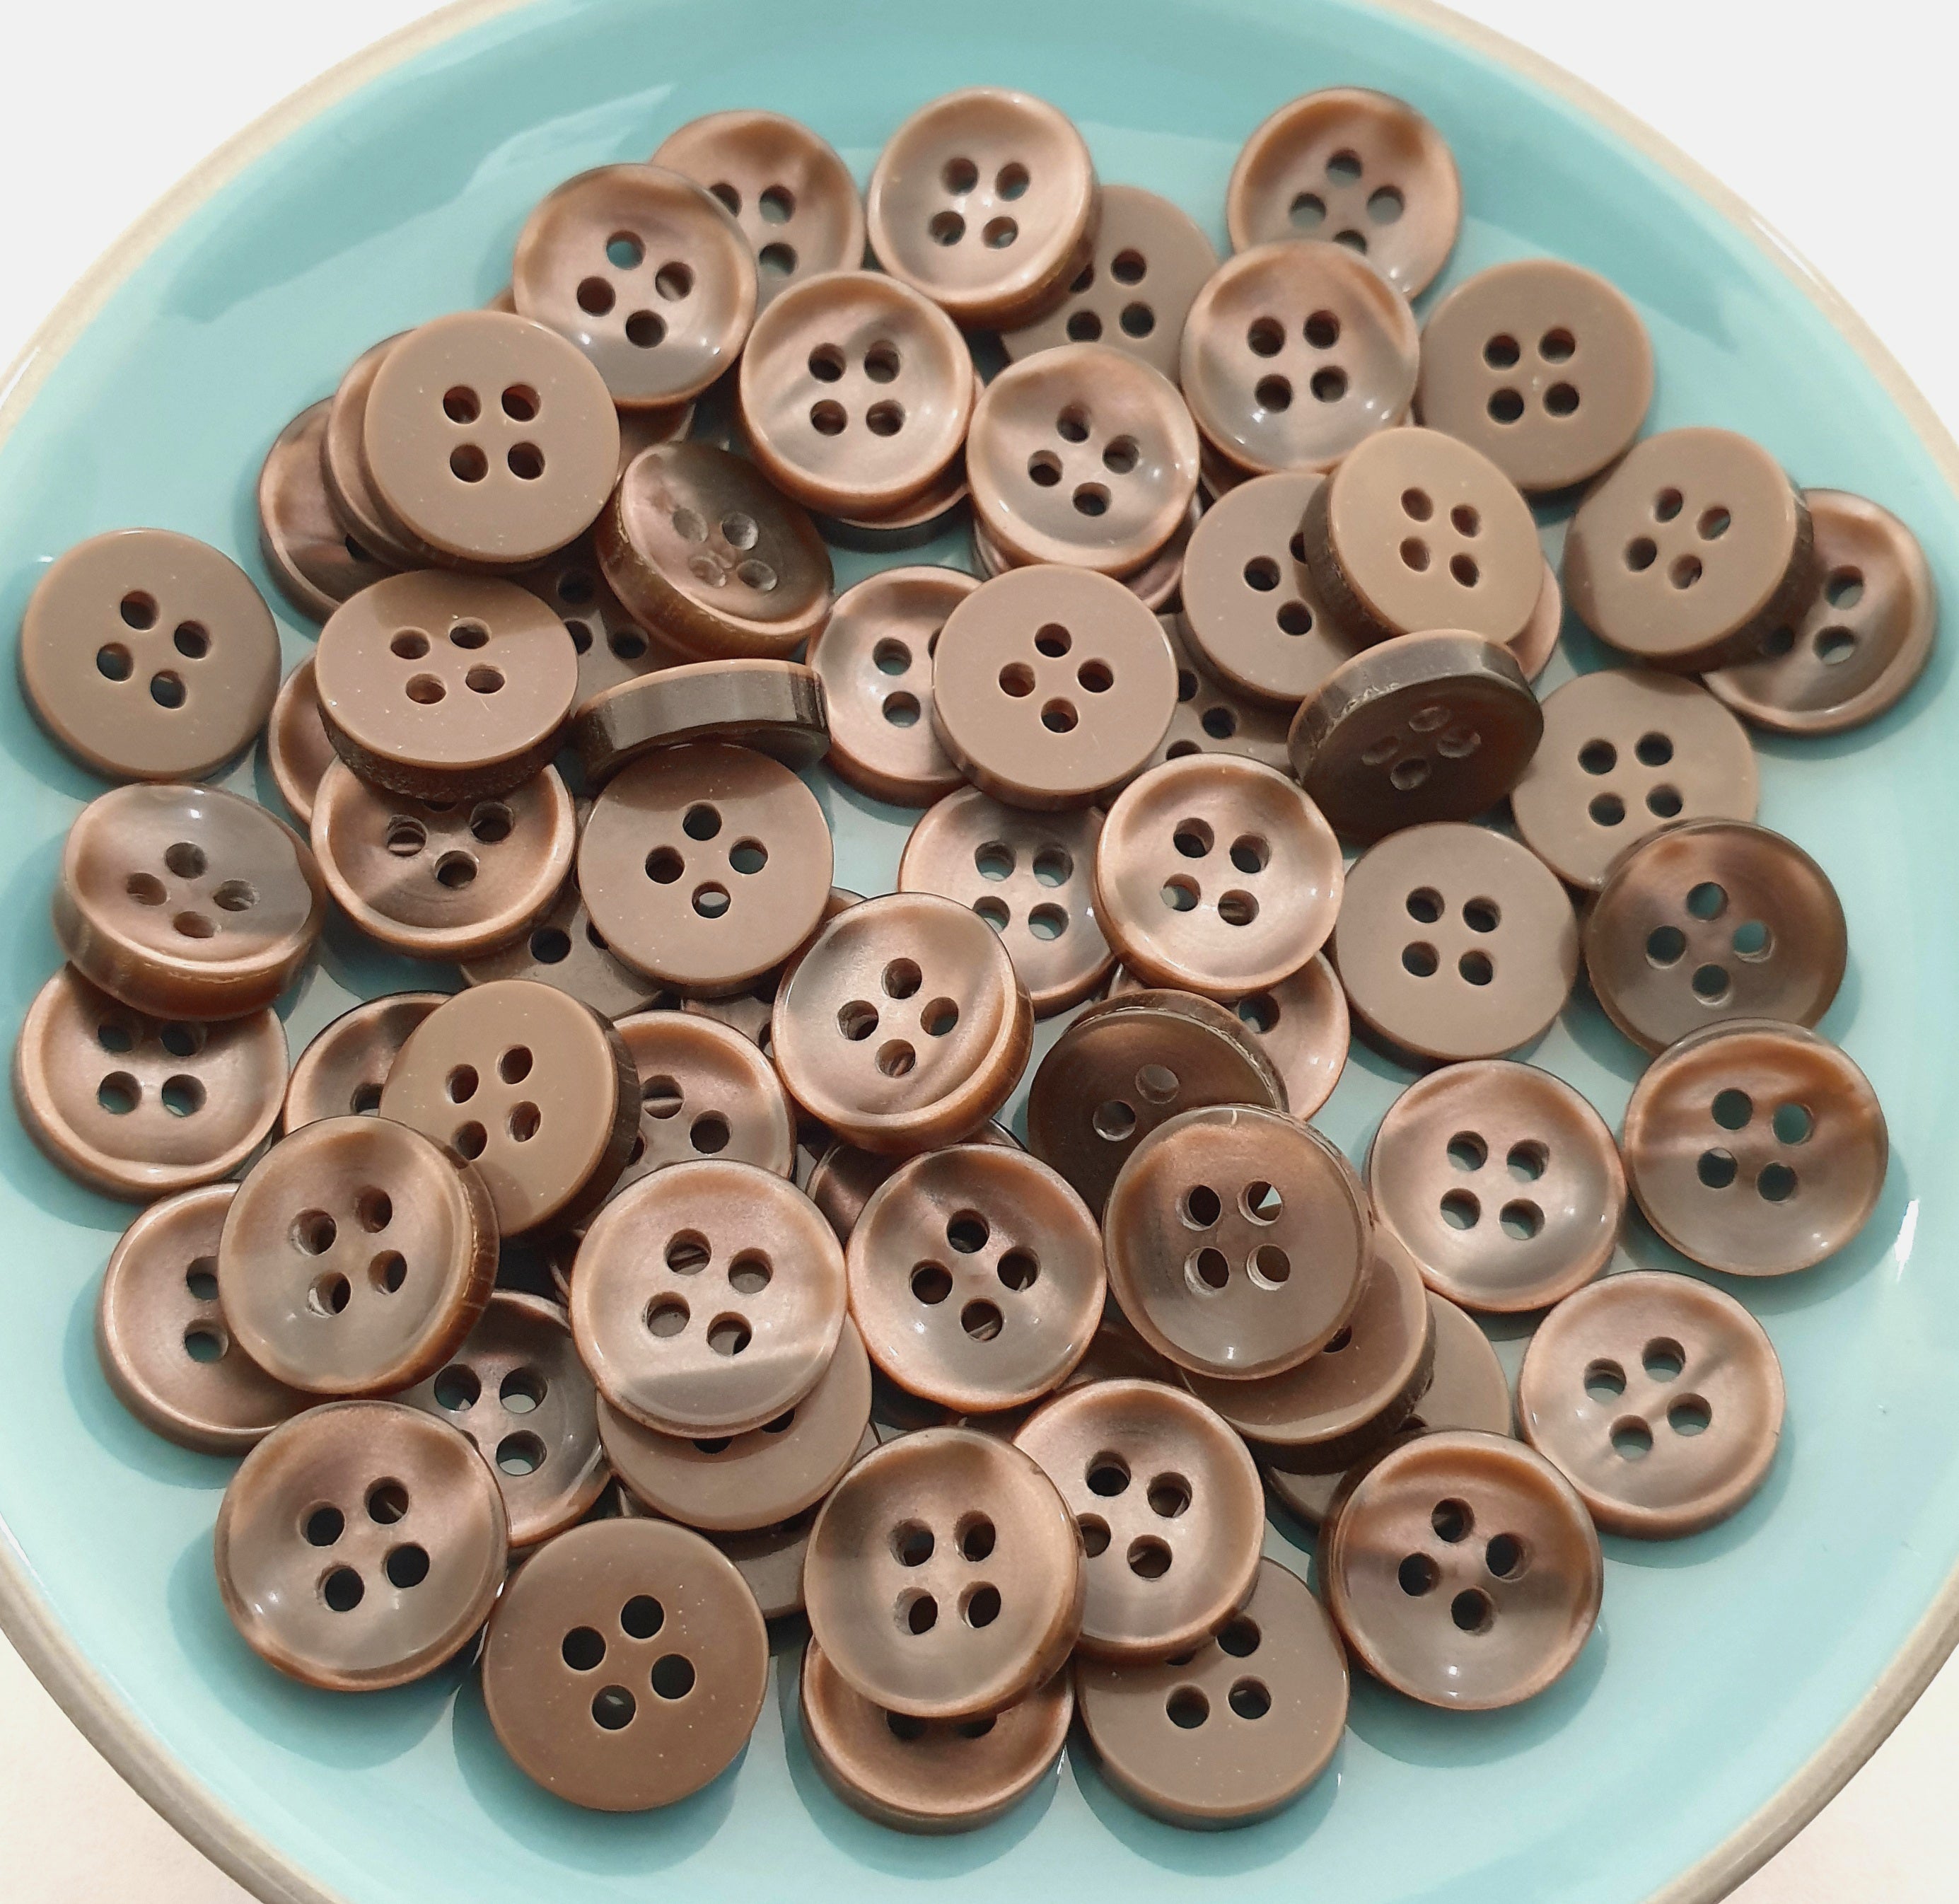 MajorCrafts 80pcs 11.5mm Deep Brown Pearlescent 4 Holes High-Grade Round Resin Small Sewing Buttons